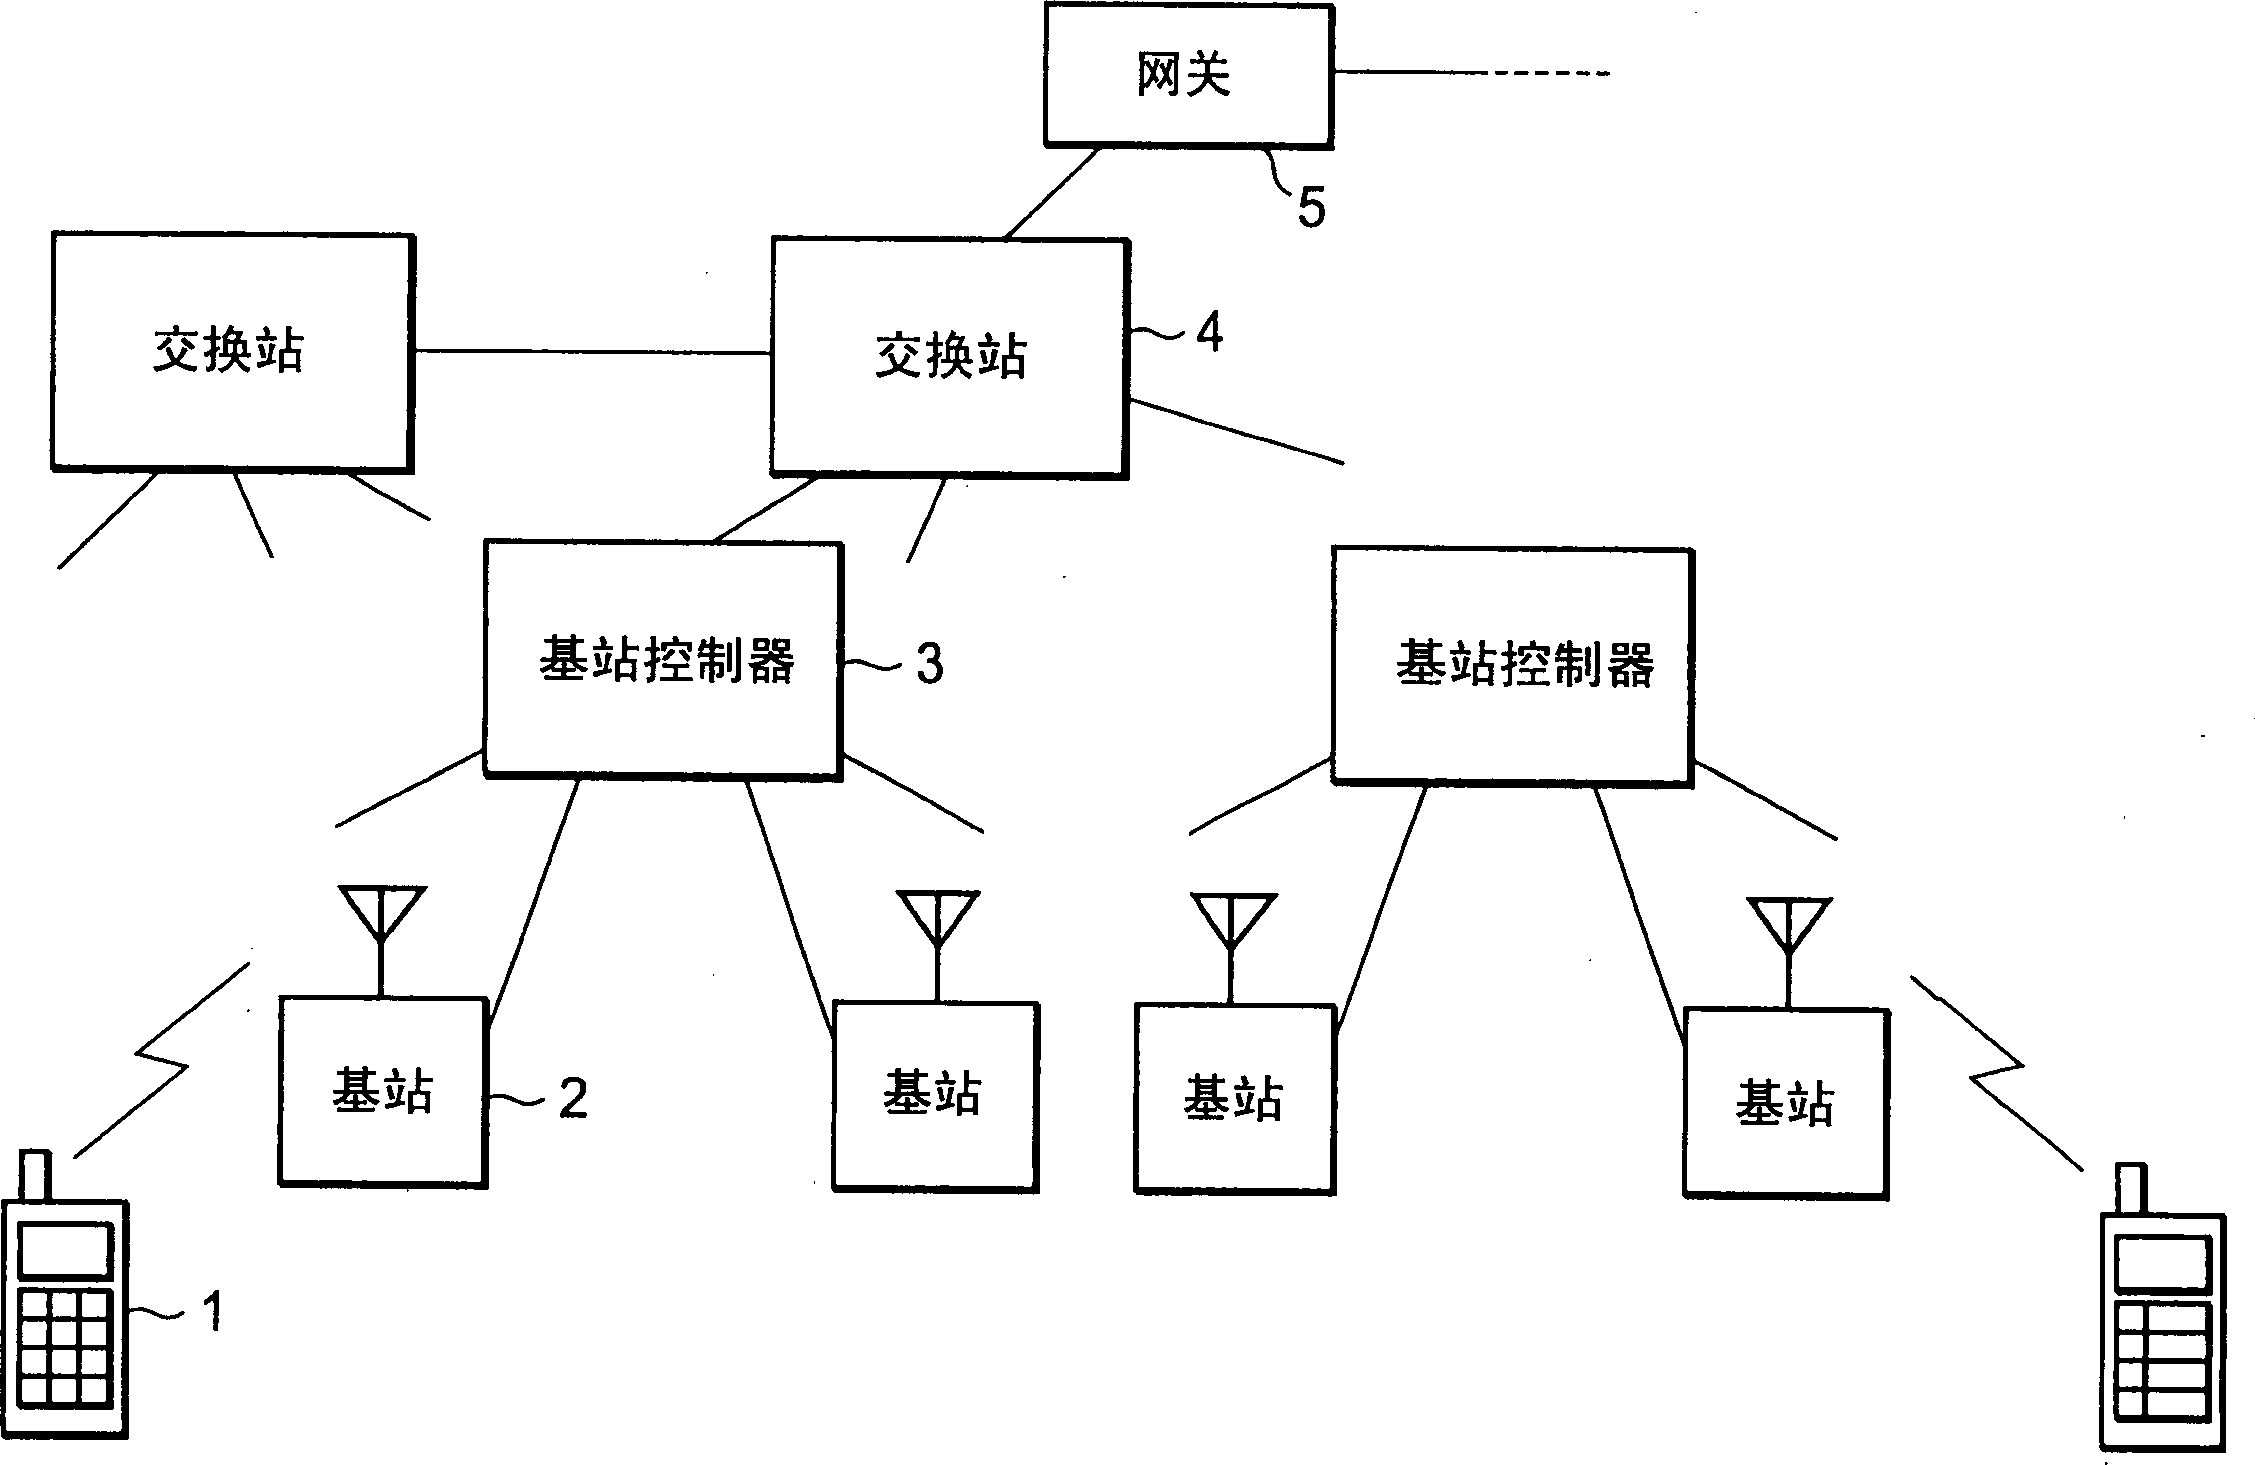 Mobile station with short-range radio function and its power consumption reducing method